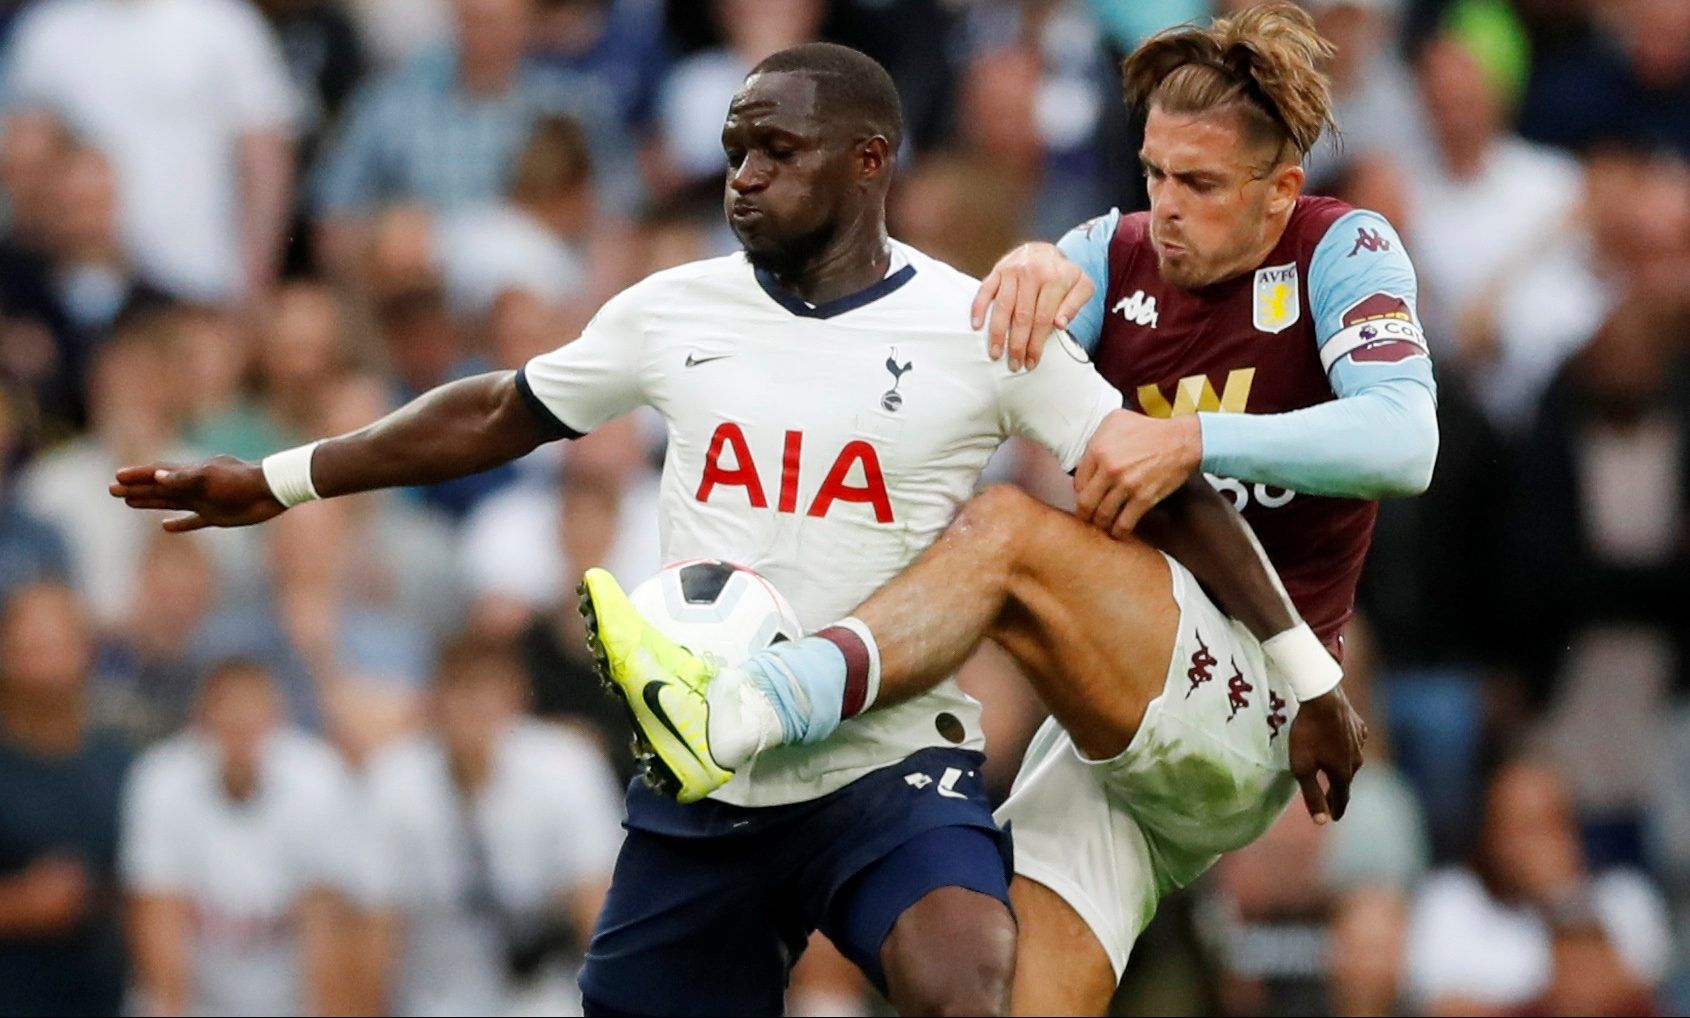 Soccer Football - Premier League - Tottenham Hotspur v Aston Villa - Tottenham Hotspur Stadium, London, Britain - August 10, 2019  Tottenham Hotspur's Moussa Sissoko in action with Aston Villa's Jack Grealish   Action Images via Reuters/Matthew Childs  EDITORIAL USE ONLY. No use with unauthorized audio, video, data, fixture lists, club/league logos or 